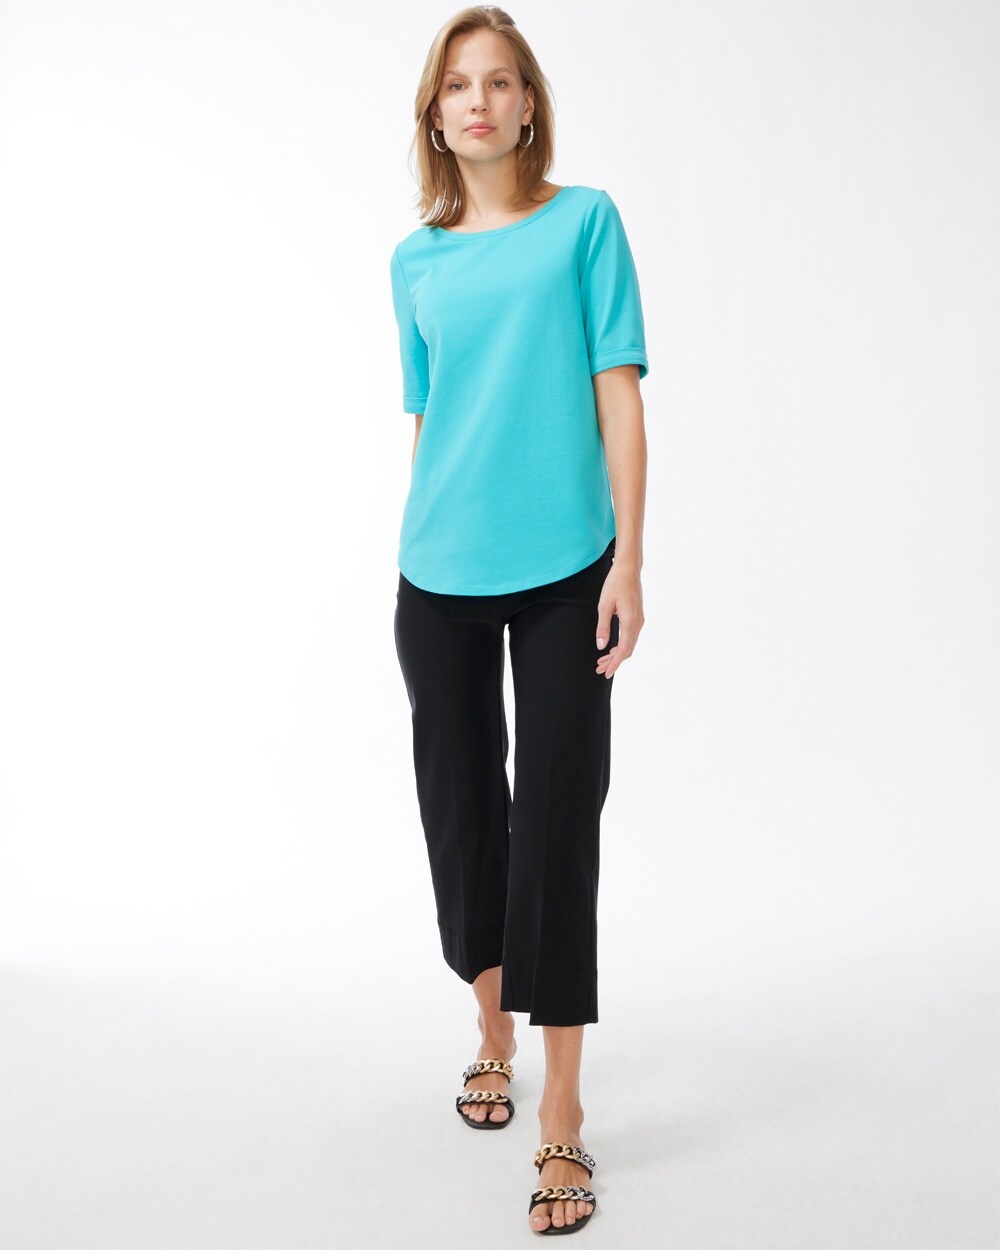 Cotton Stretch Perfect Tee